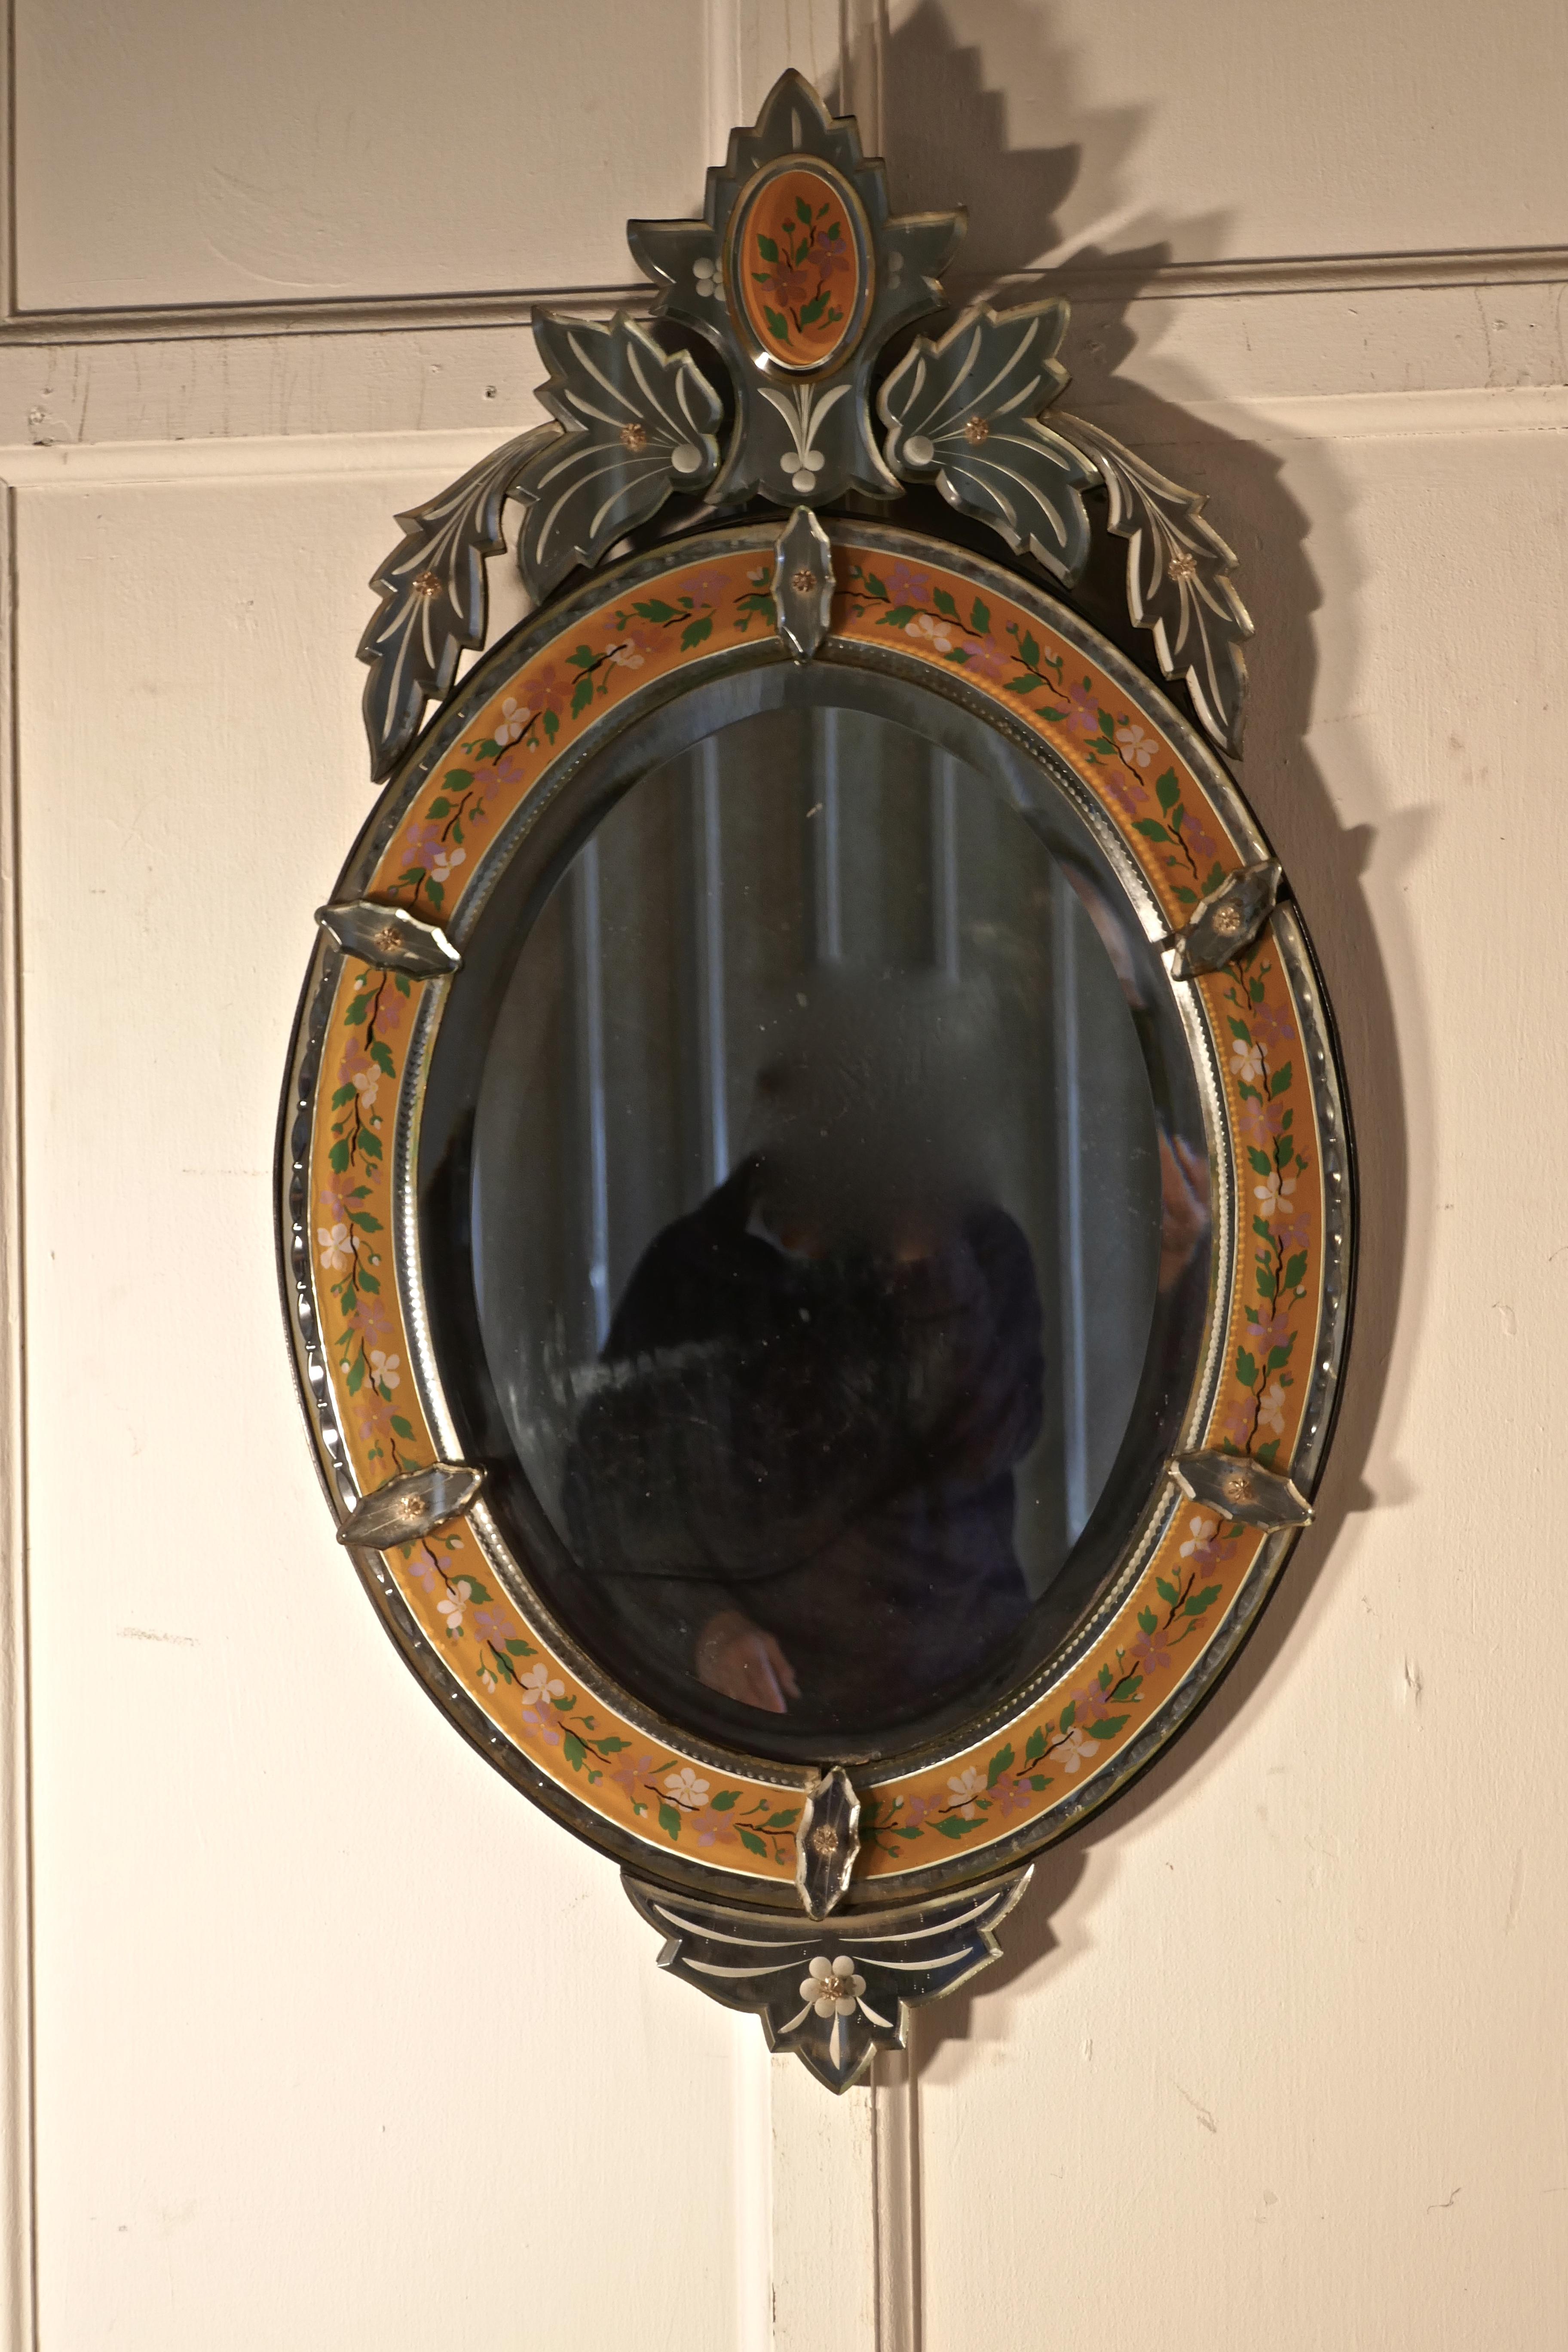 Superb Large Arts & Crafts Venetian Mirror

This is a very rare piece, it is absolutely original, the large Oval bevelled centre glass is bordered by a reverse painted glass surround, it has a tall leafy crest at the top and a smaller matching